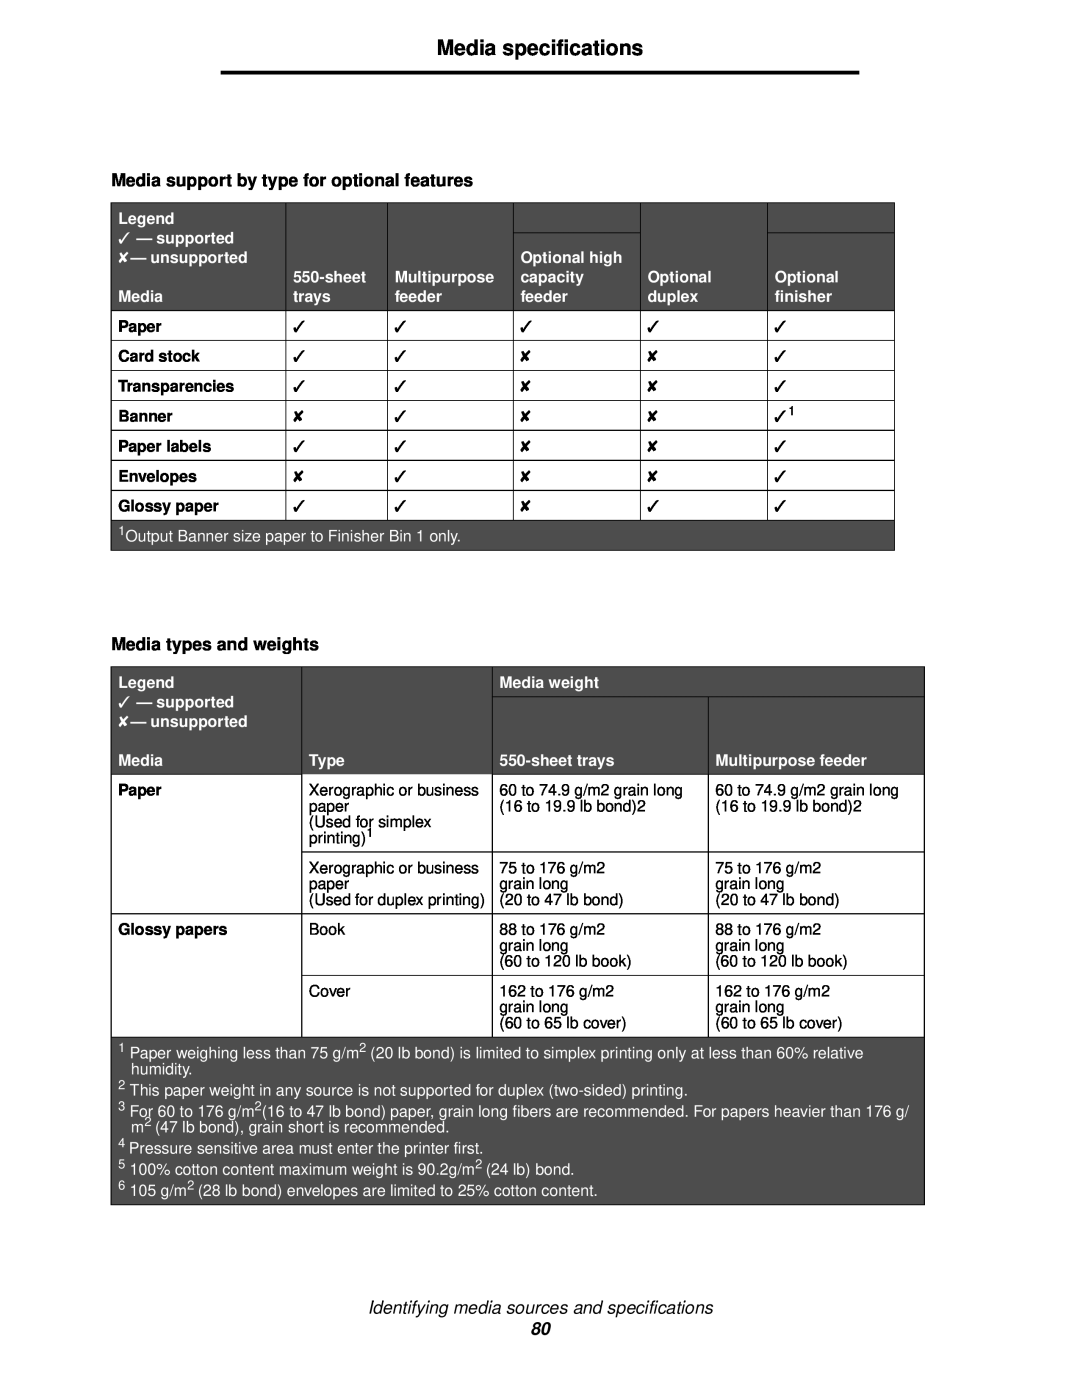 Lexmark 920 Media specifications, Media support by type for optional features, Media types and weights, Paper, Card stock 